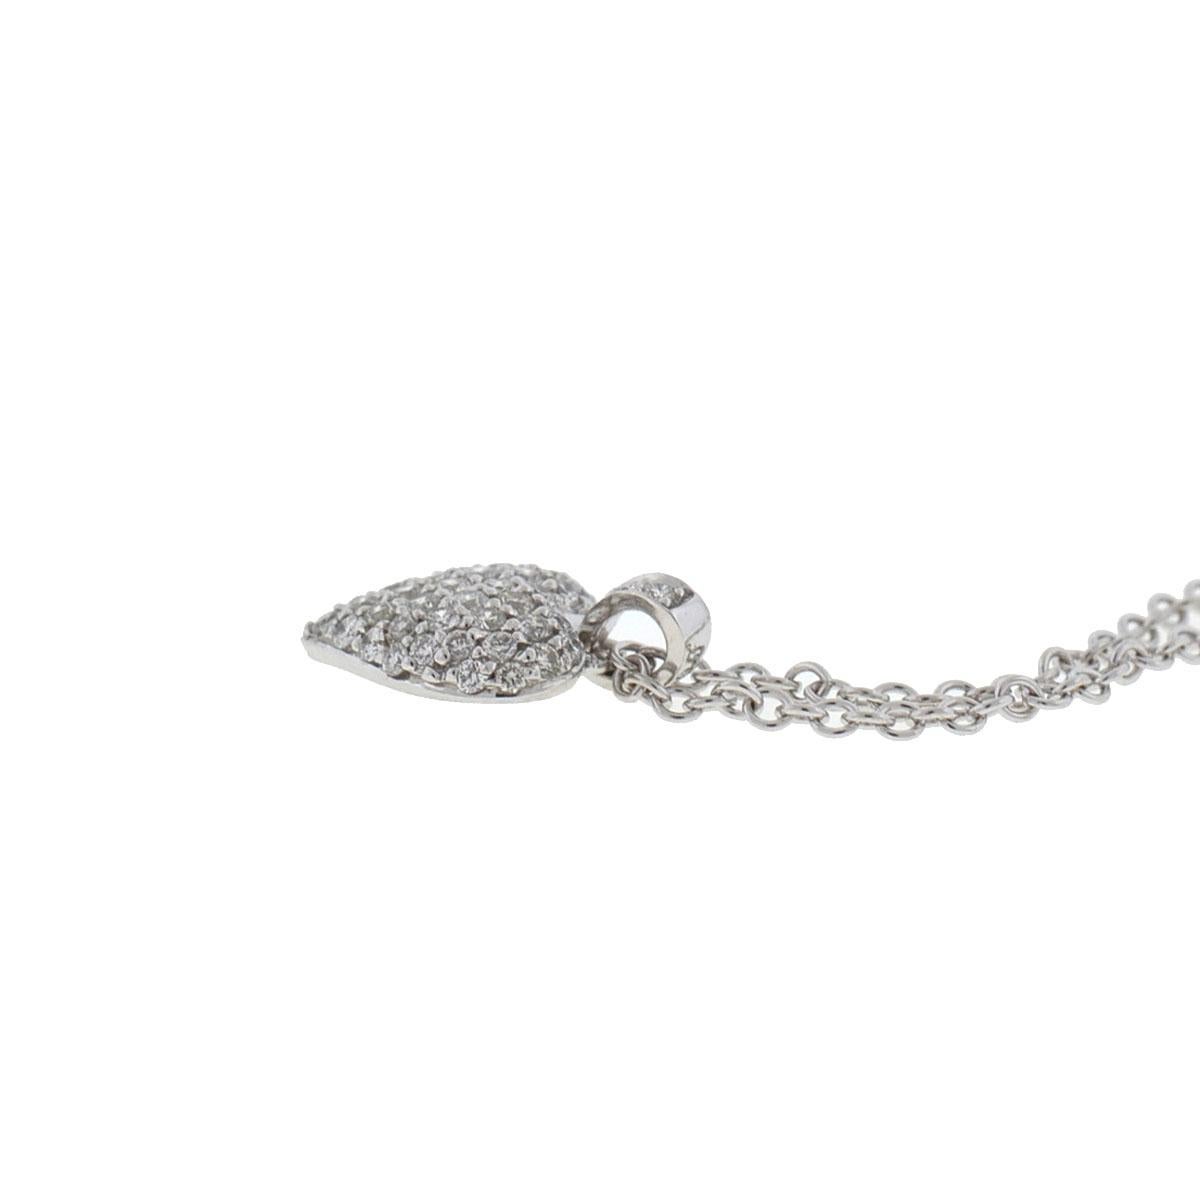 Women's or Men's 18 Karat White Gold Heart Pave Necklace with Fine Chain Necklace .48 Carat